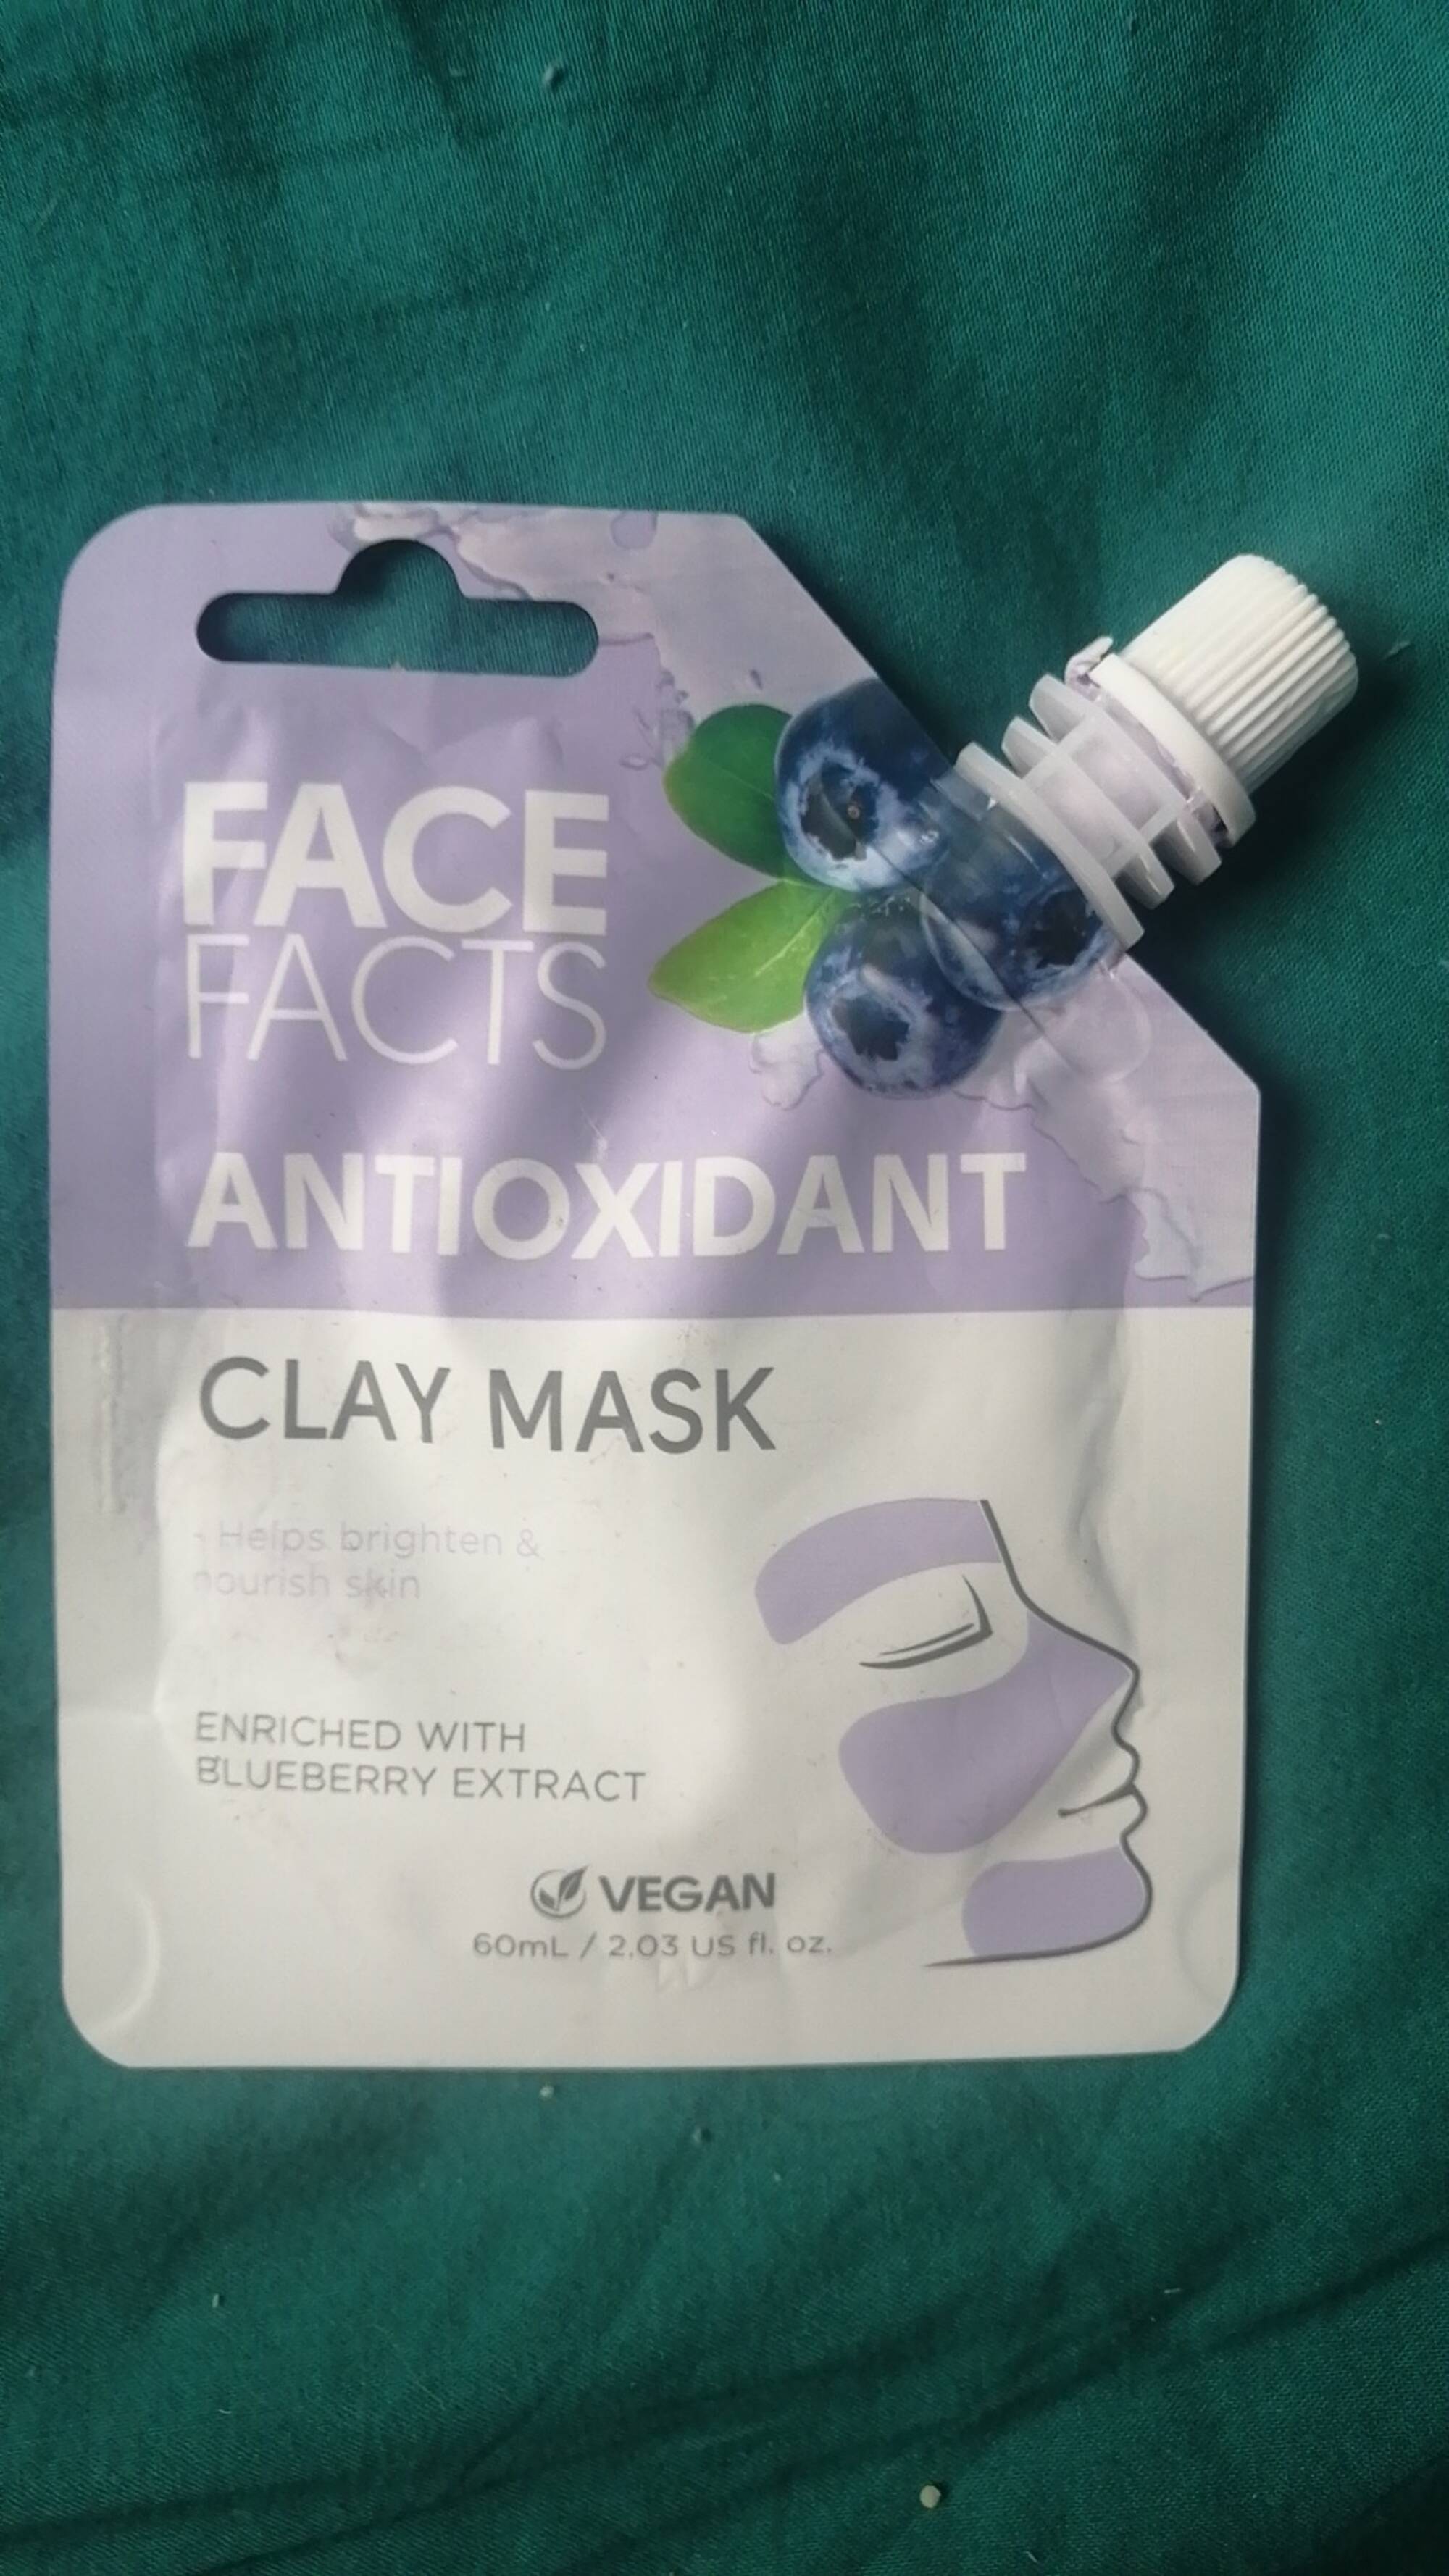 FACE FACTS - Antioxidant - Clay mask